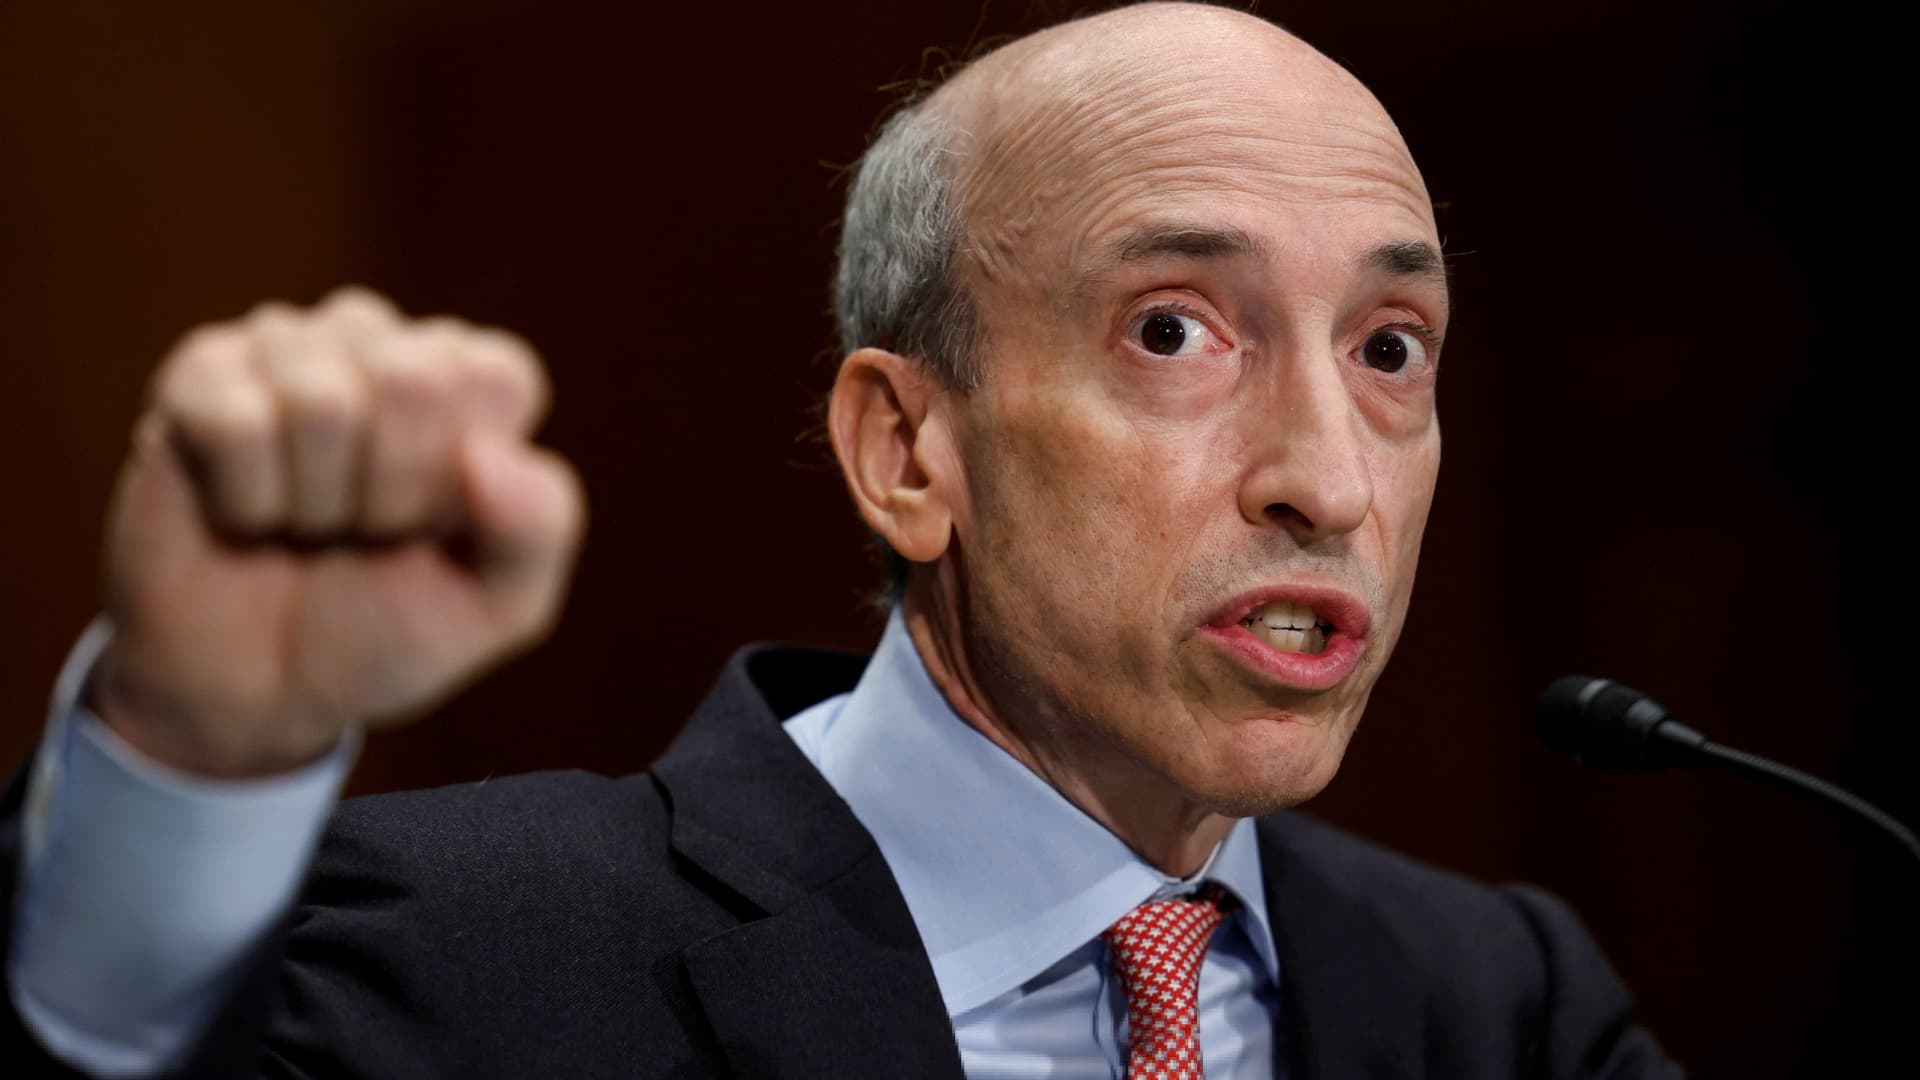 SEC Chairman Gary Gensler says 'the law is clear' for crypto exchanges